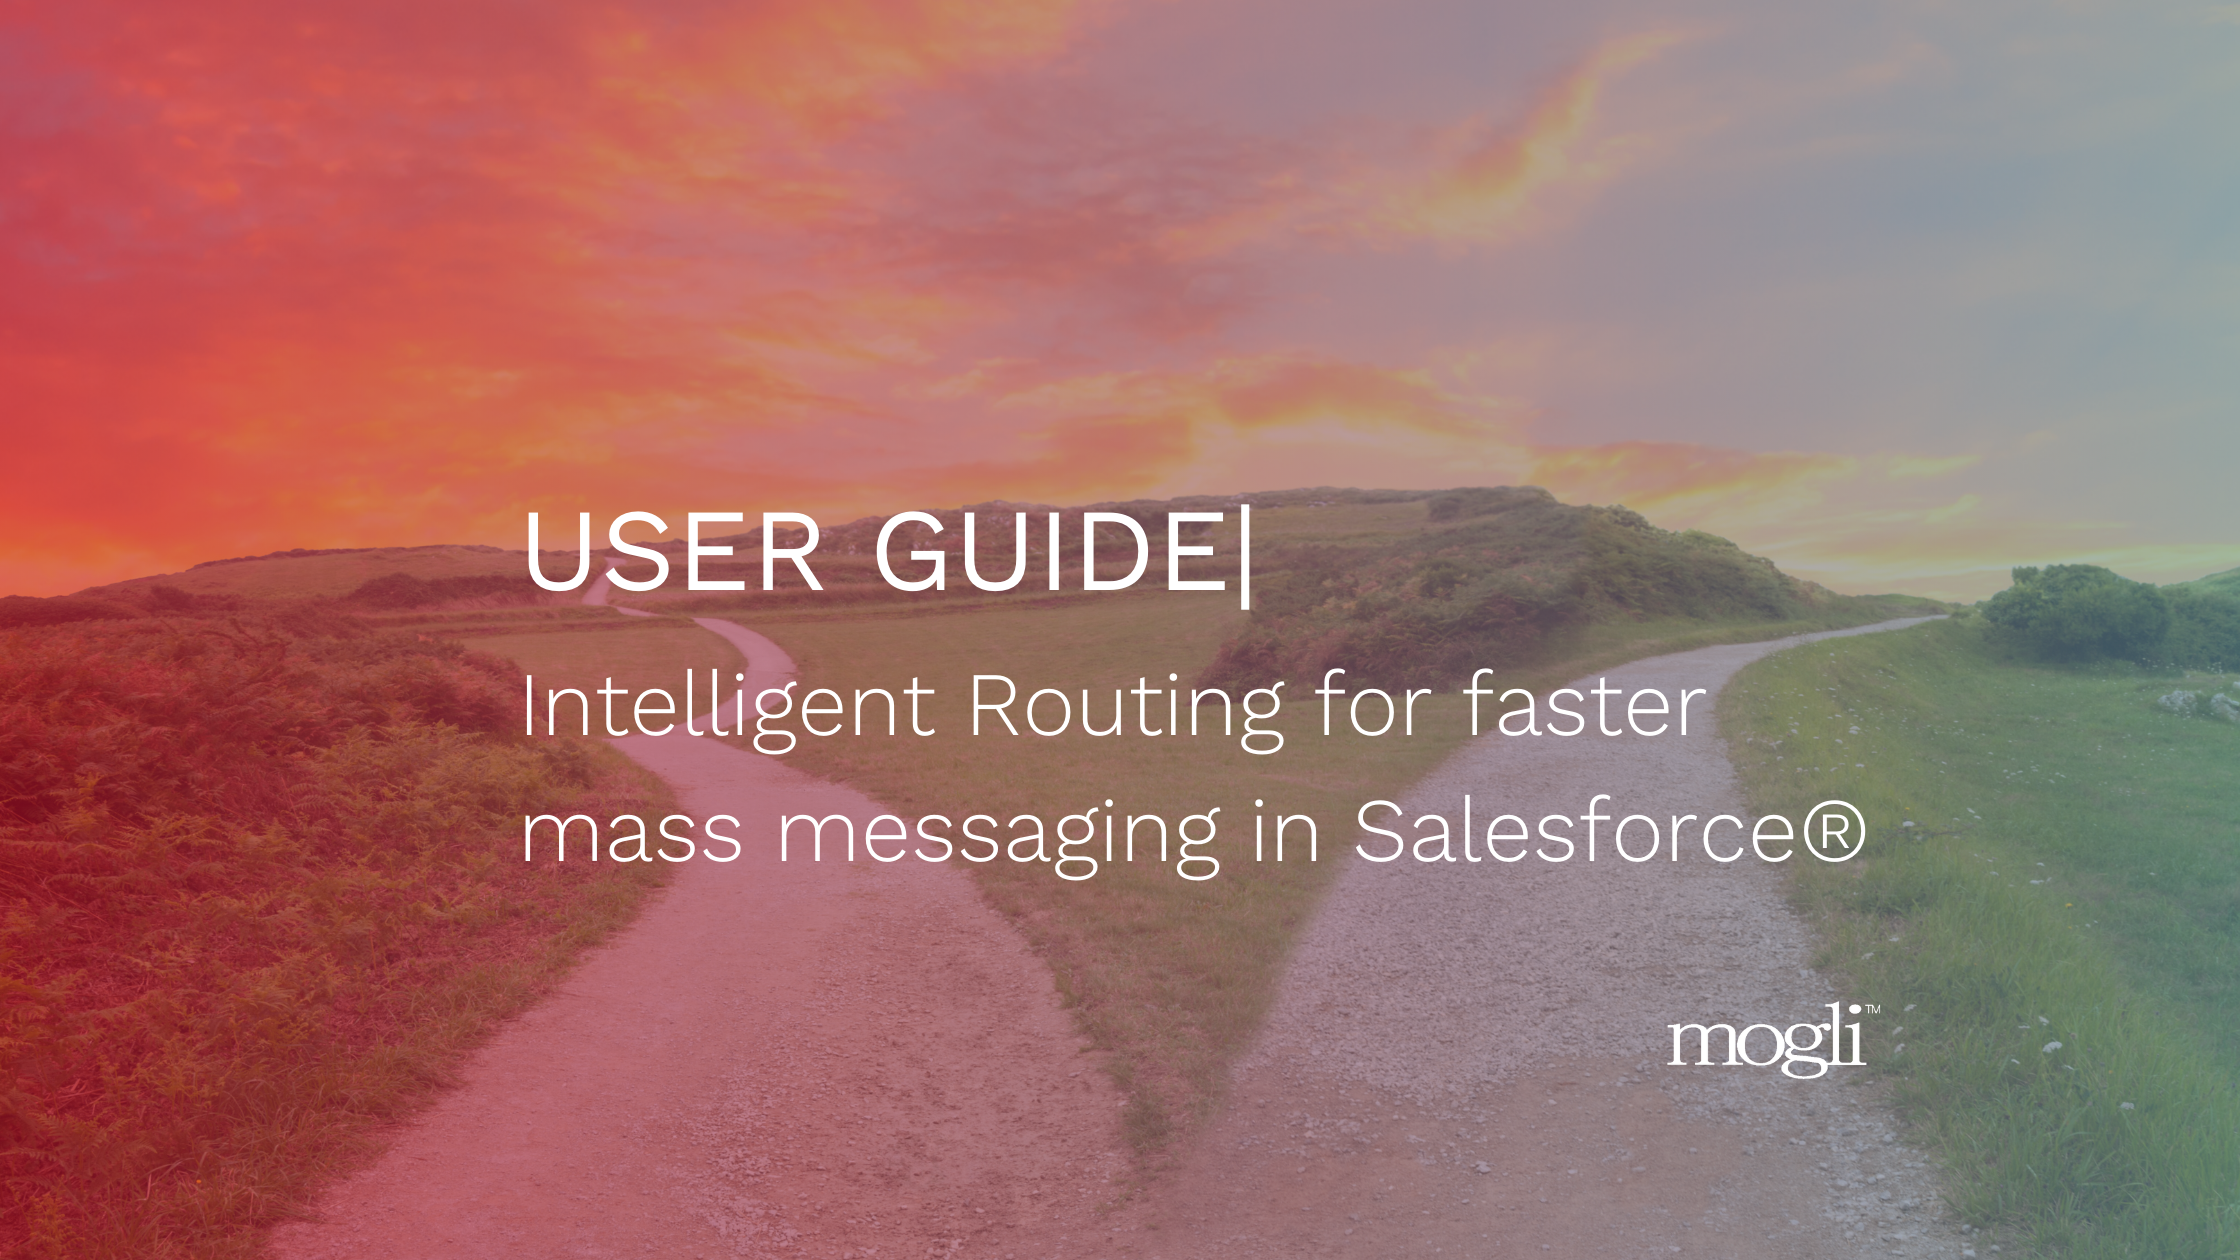 User guide | intelligent routing for faster mass messaging in Salesforce title with mogli logo and gradient overlaying splitting dirt roads through rolling hills with a sunset sky